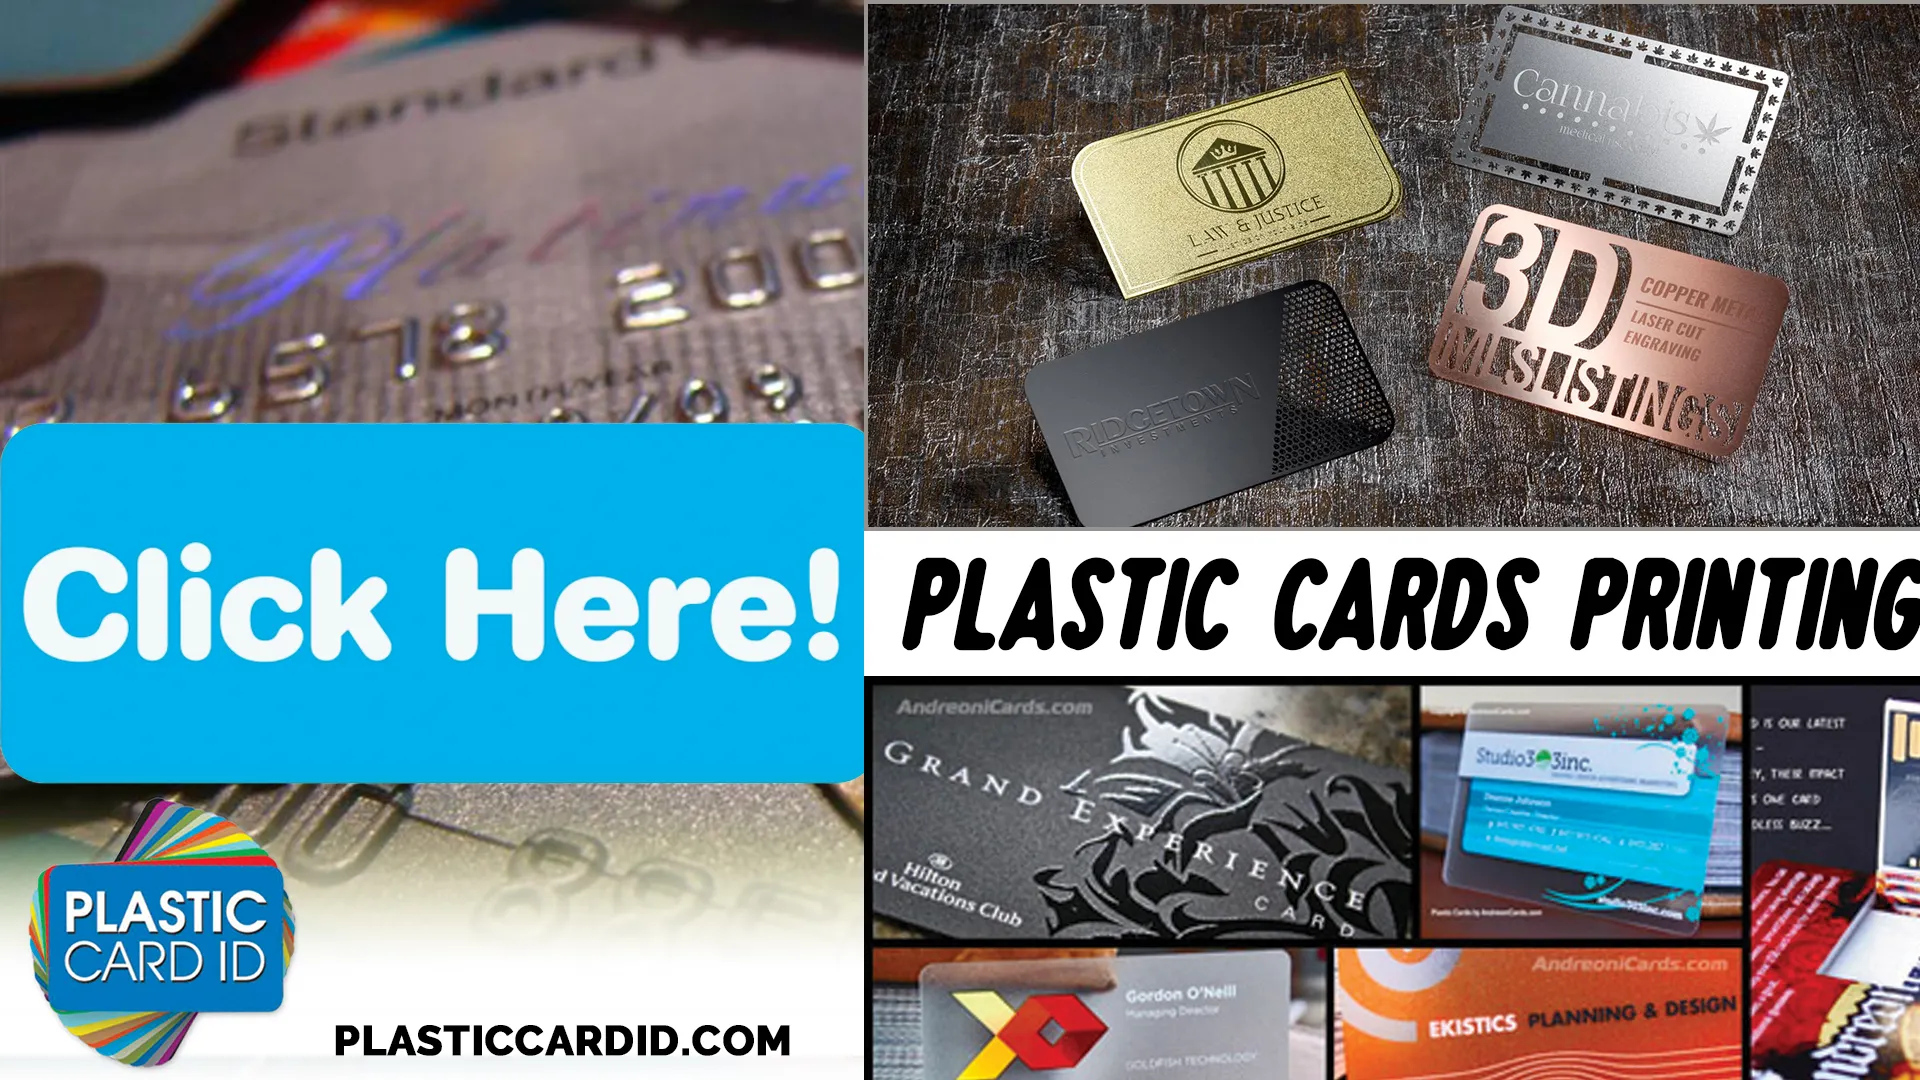 Welcome to Personalized Plastic Card Solutions for Every Business Need